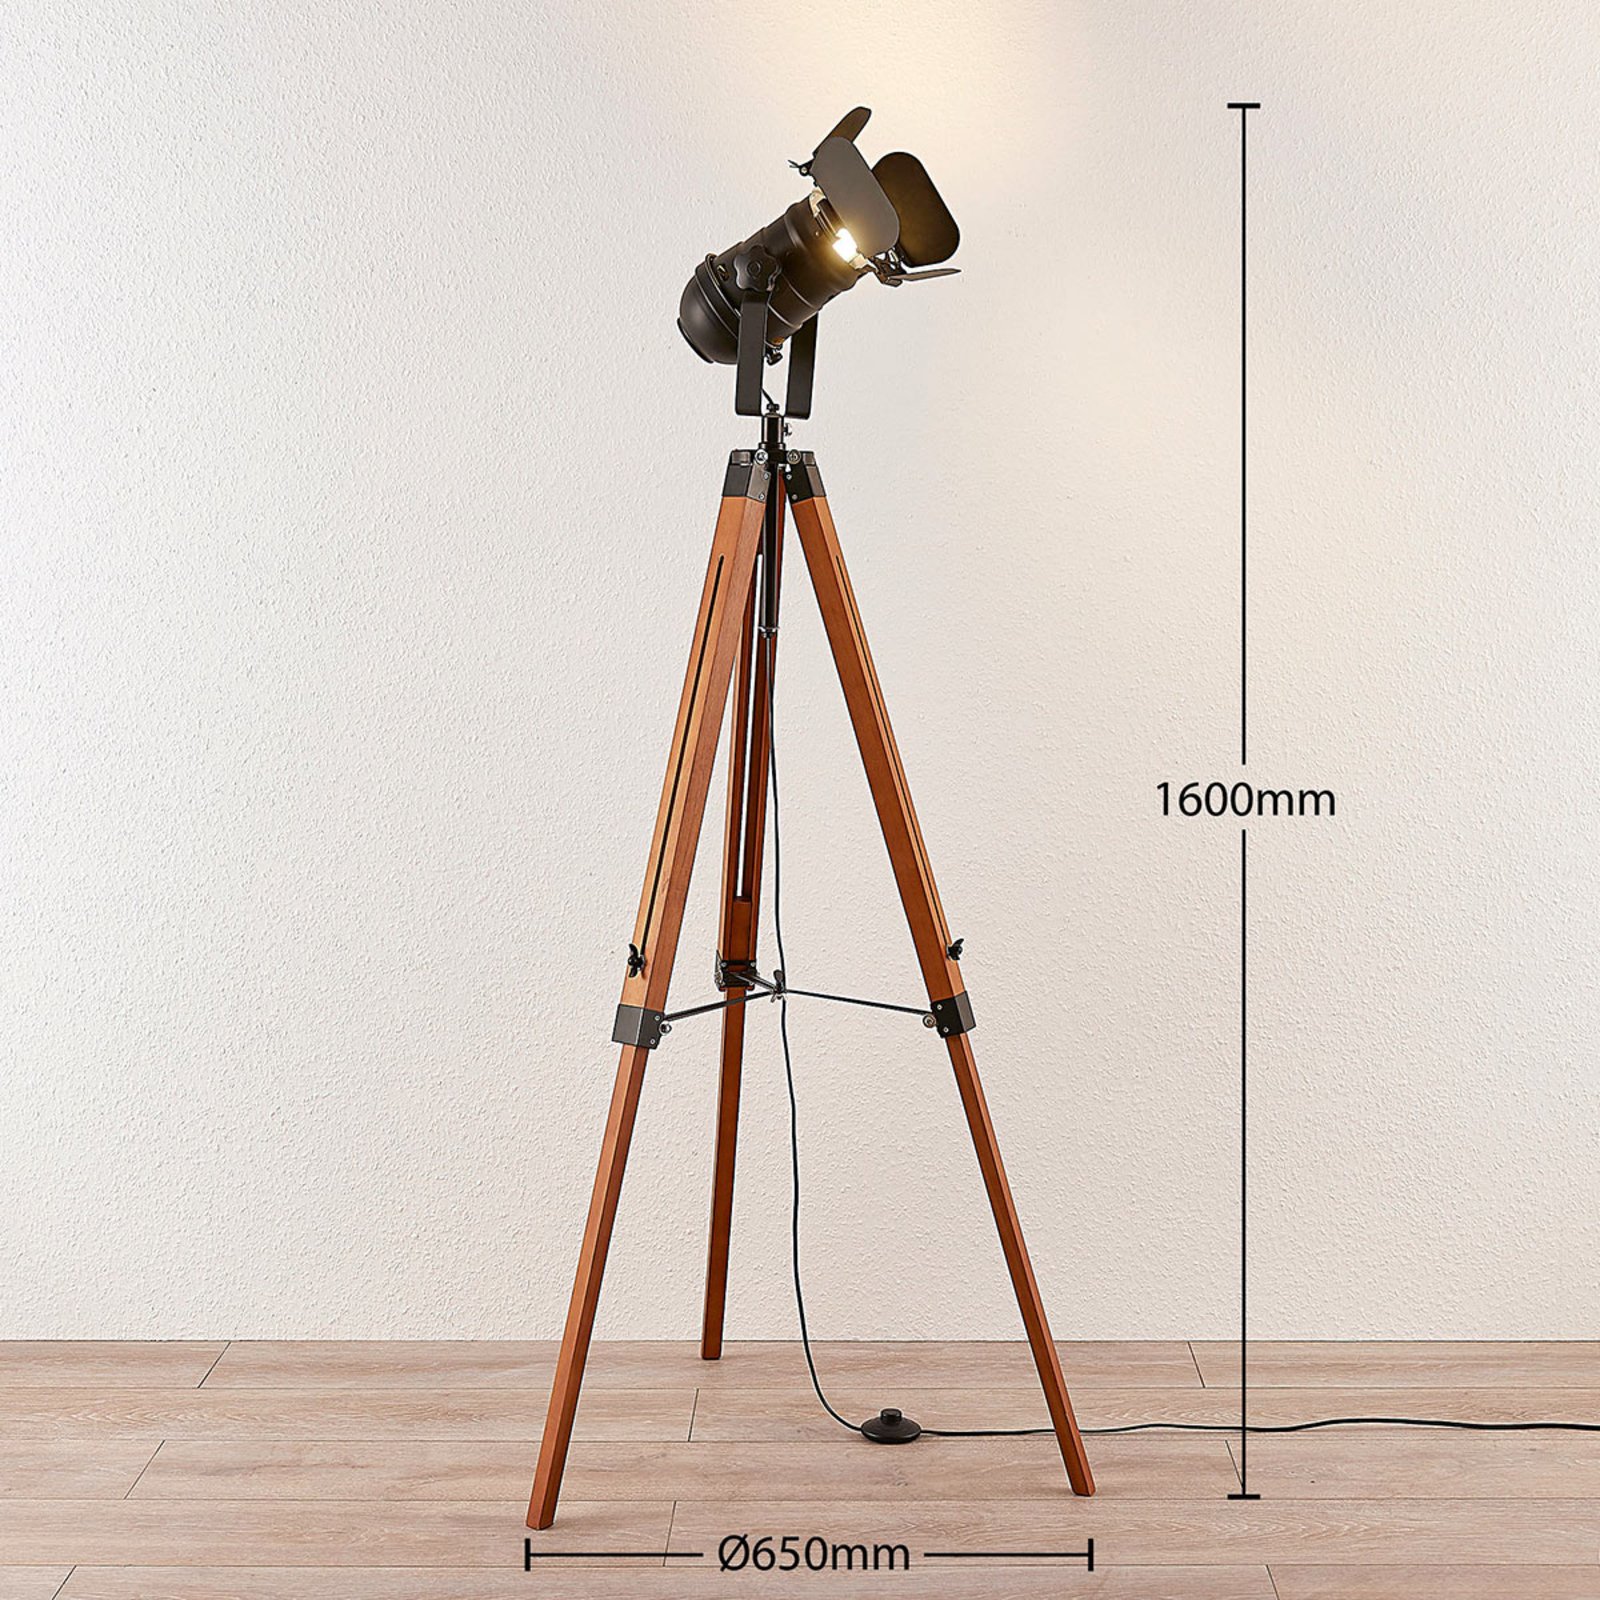 Wooden floor lamp Hilma with tripod frame